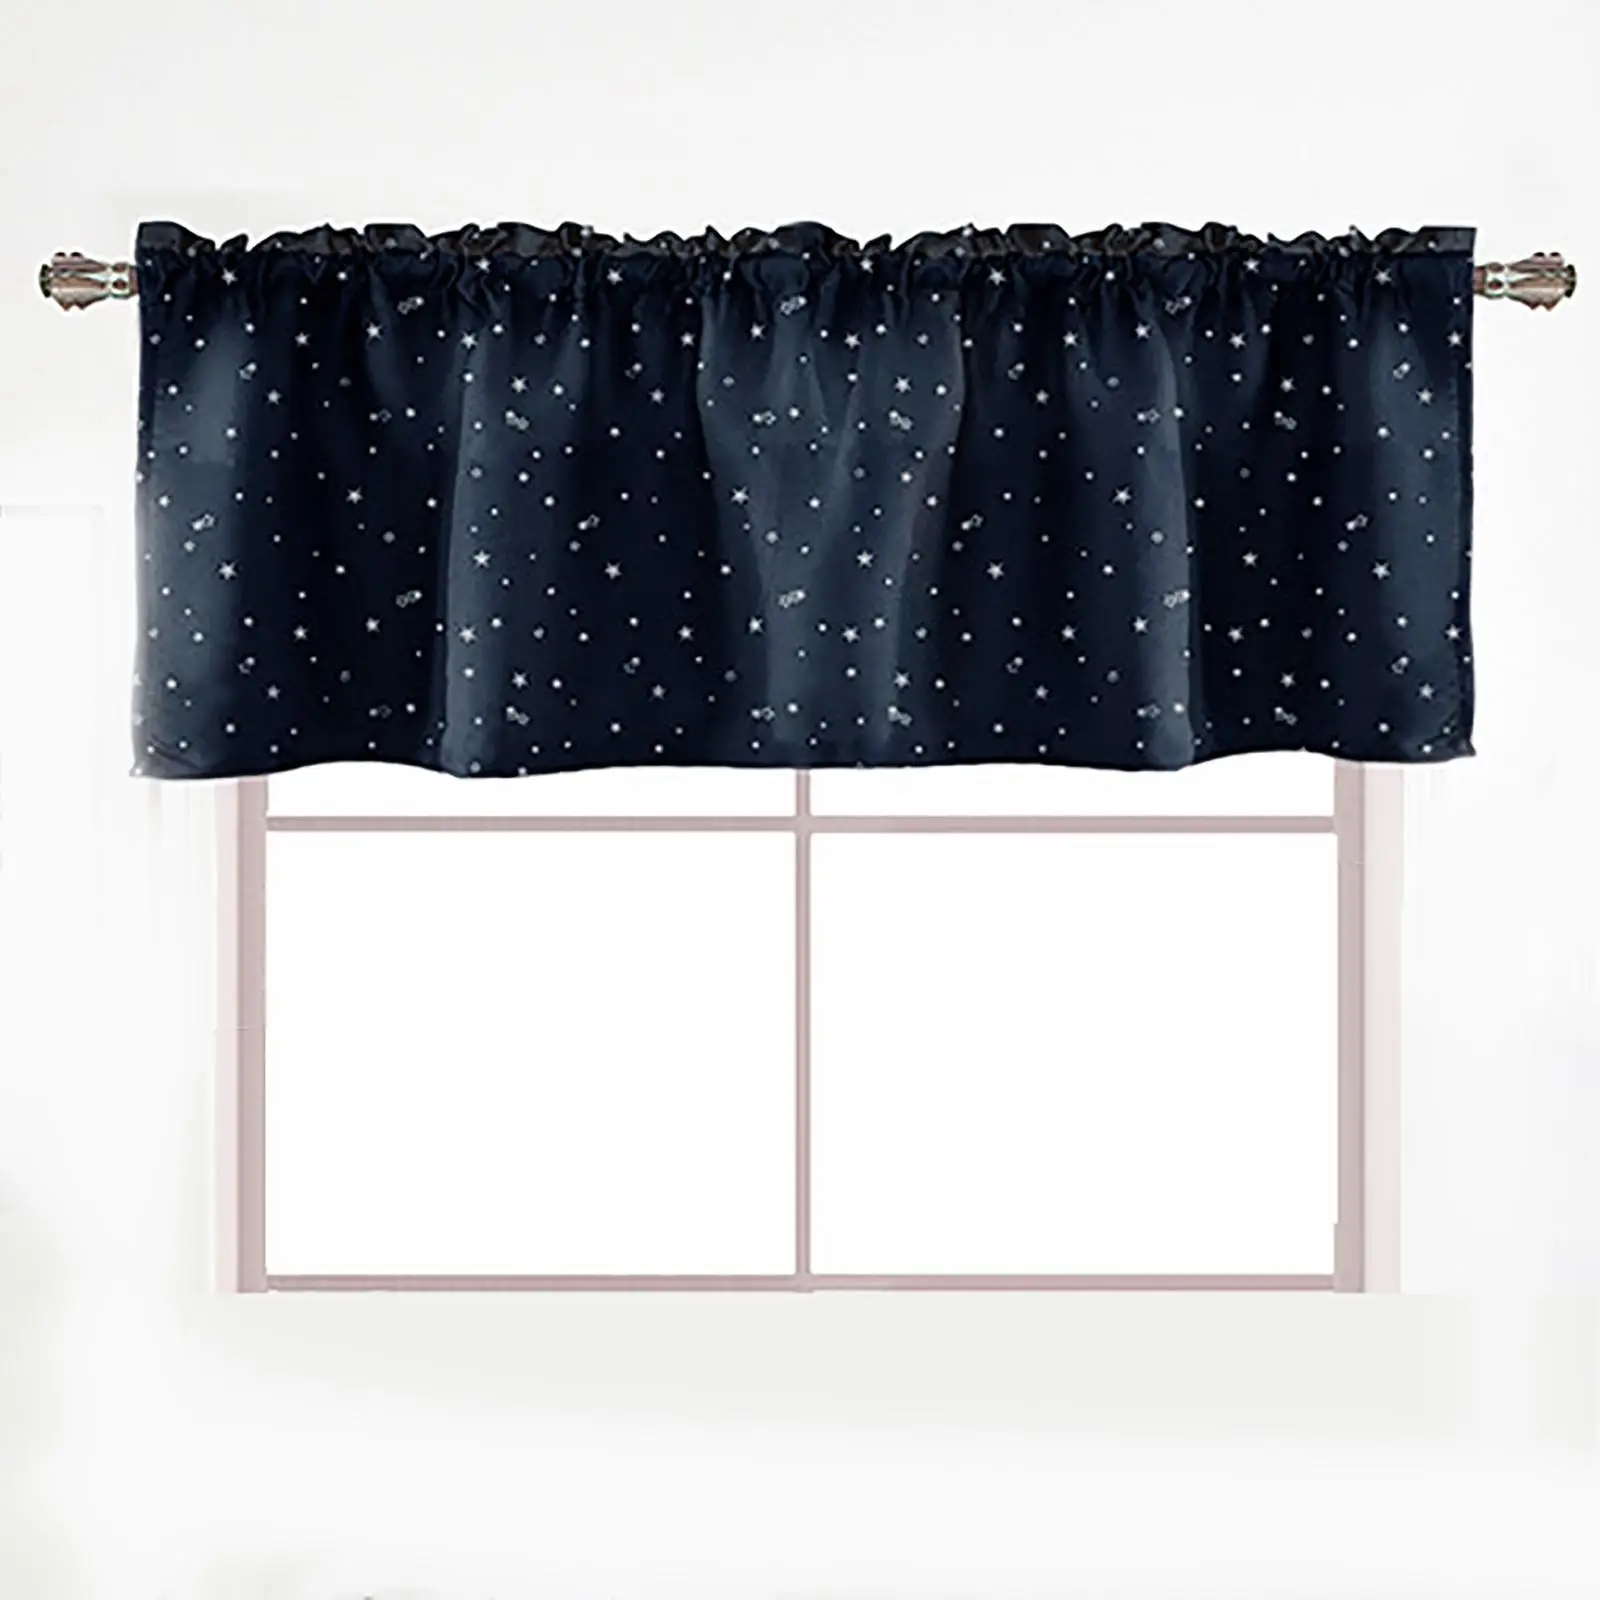 1 Panel Blackout Curtain Decor Cut Out Easy Care Machine Washable Rod Pocket Curtains Window Curtains Drapes for Bedroom Study